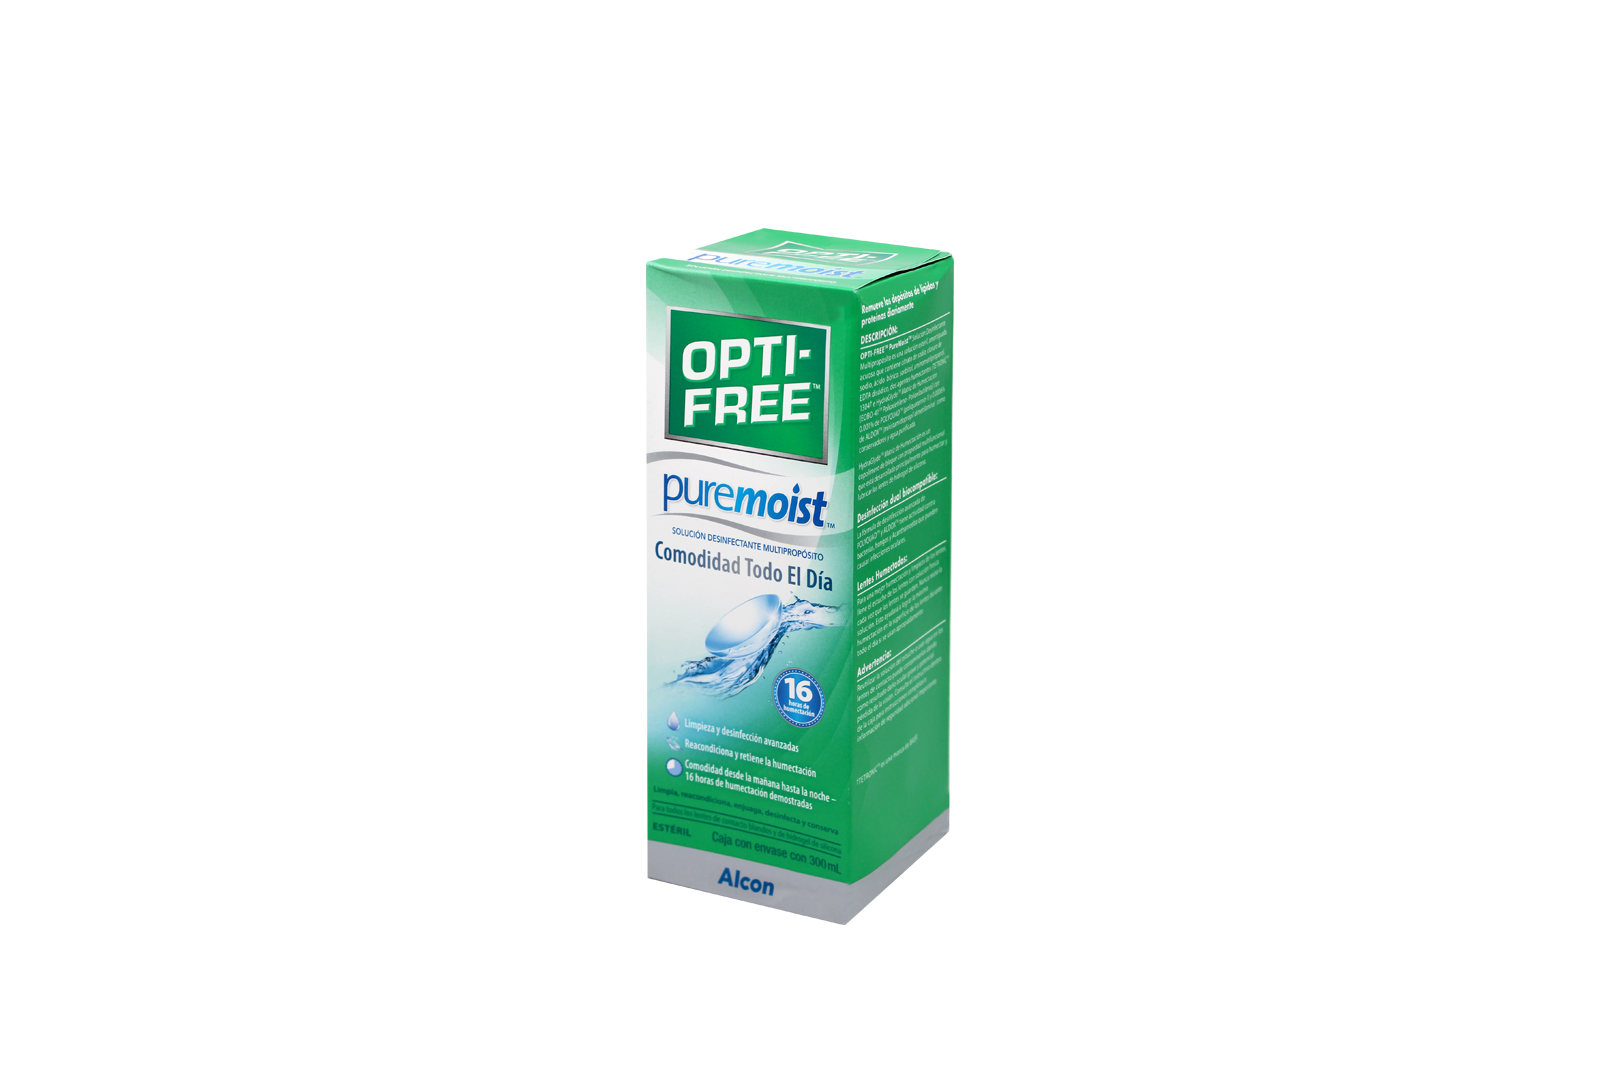 Opti-free Pure Moist x300ml | Rotter y Krauss image number 0